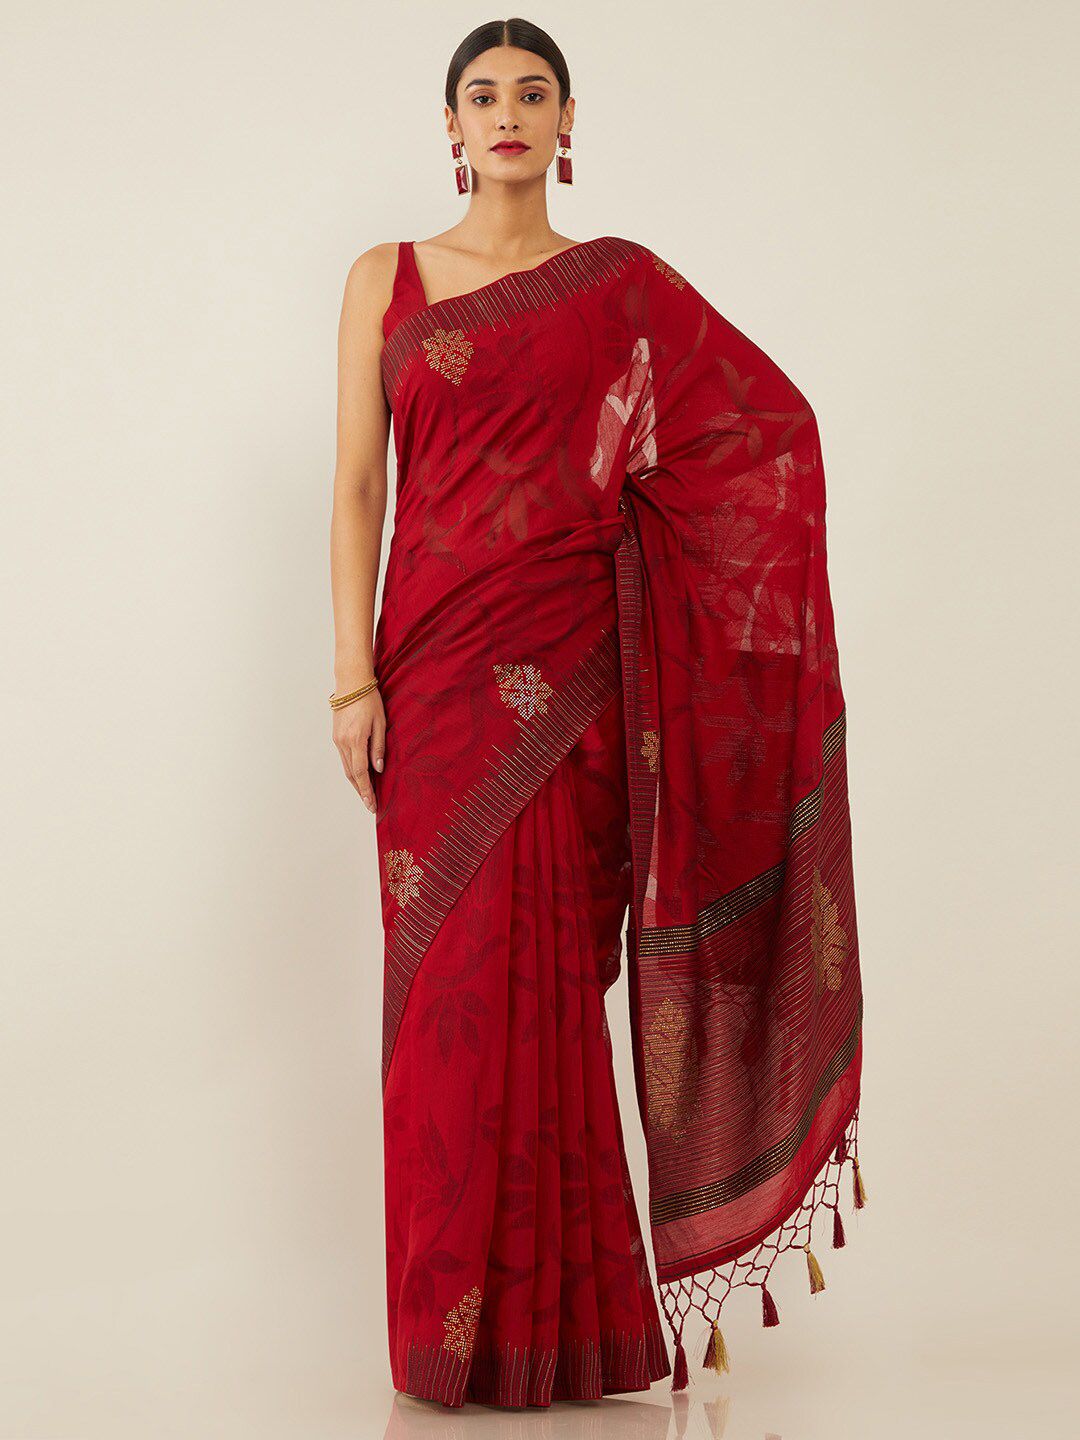 Soch Maroon & Gold-Toned Floral Pure Silk Saree Price in India